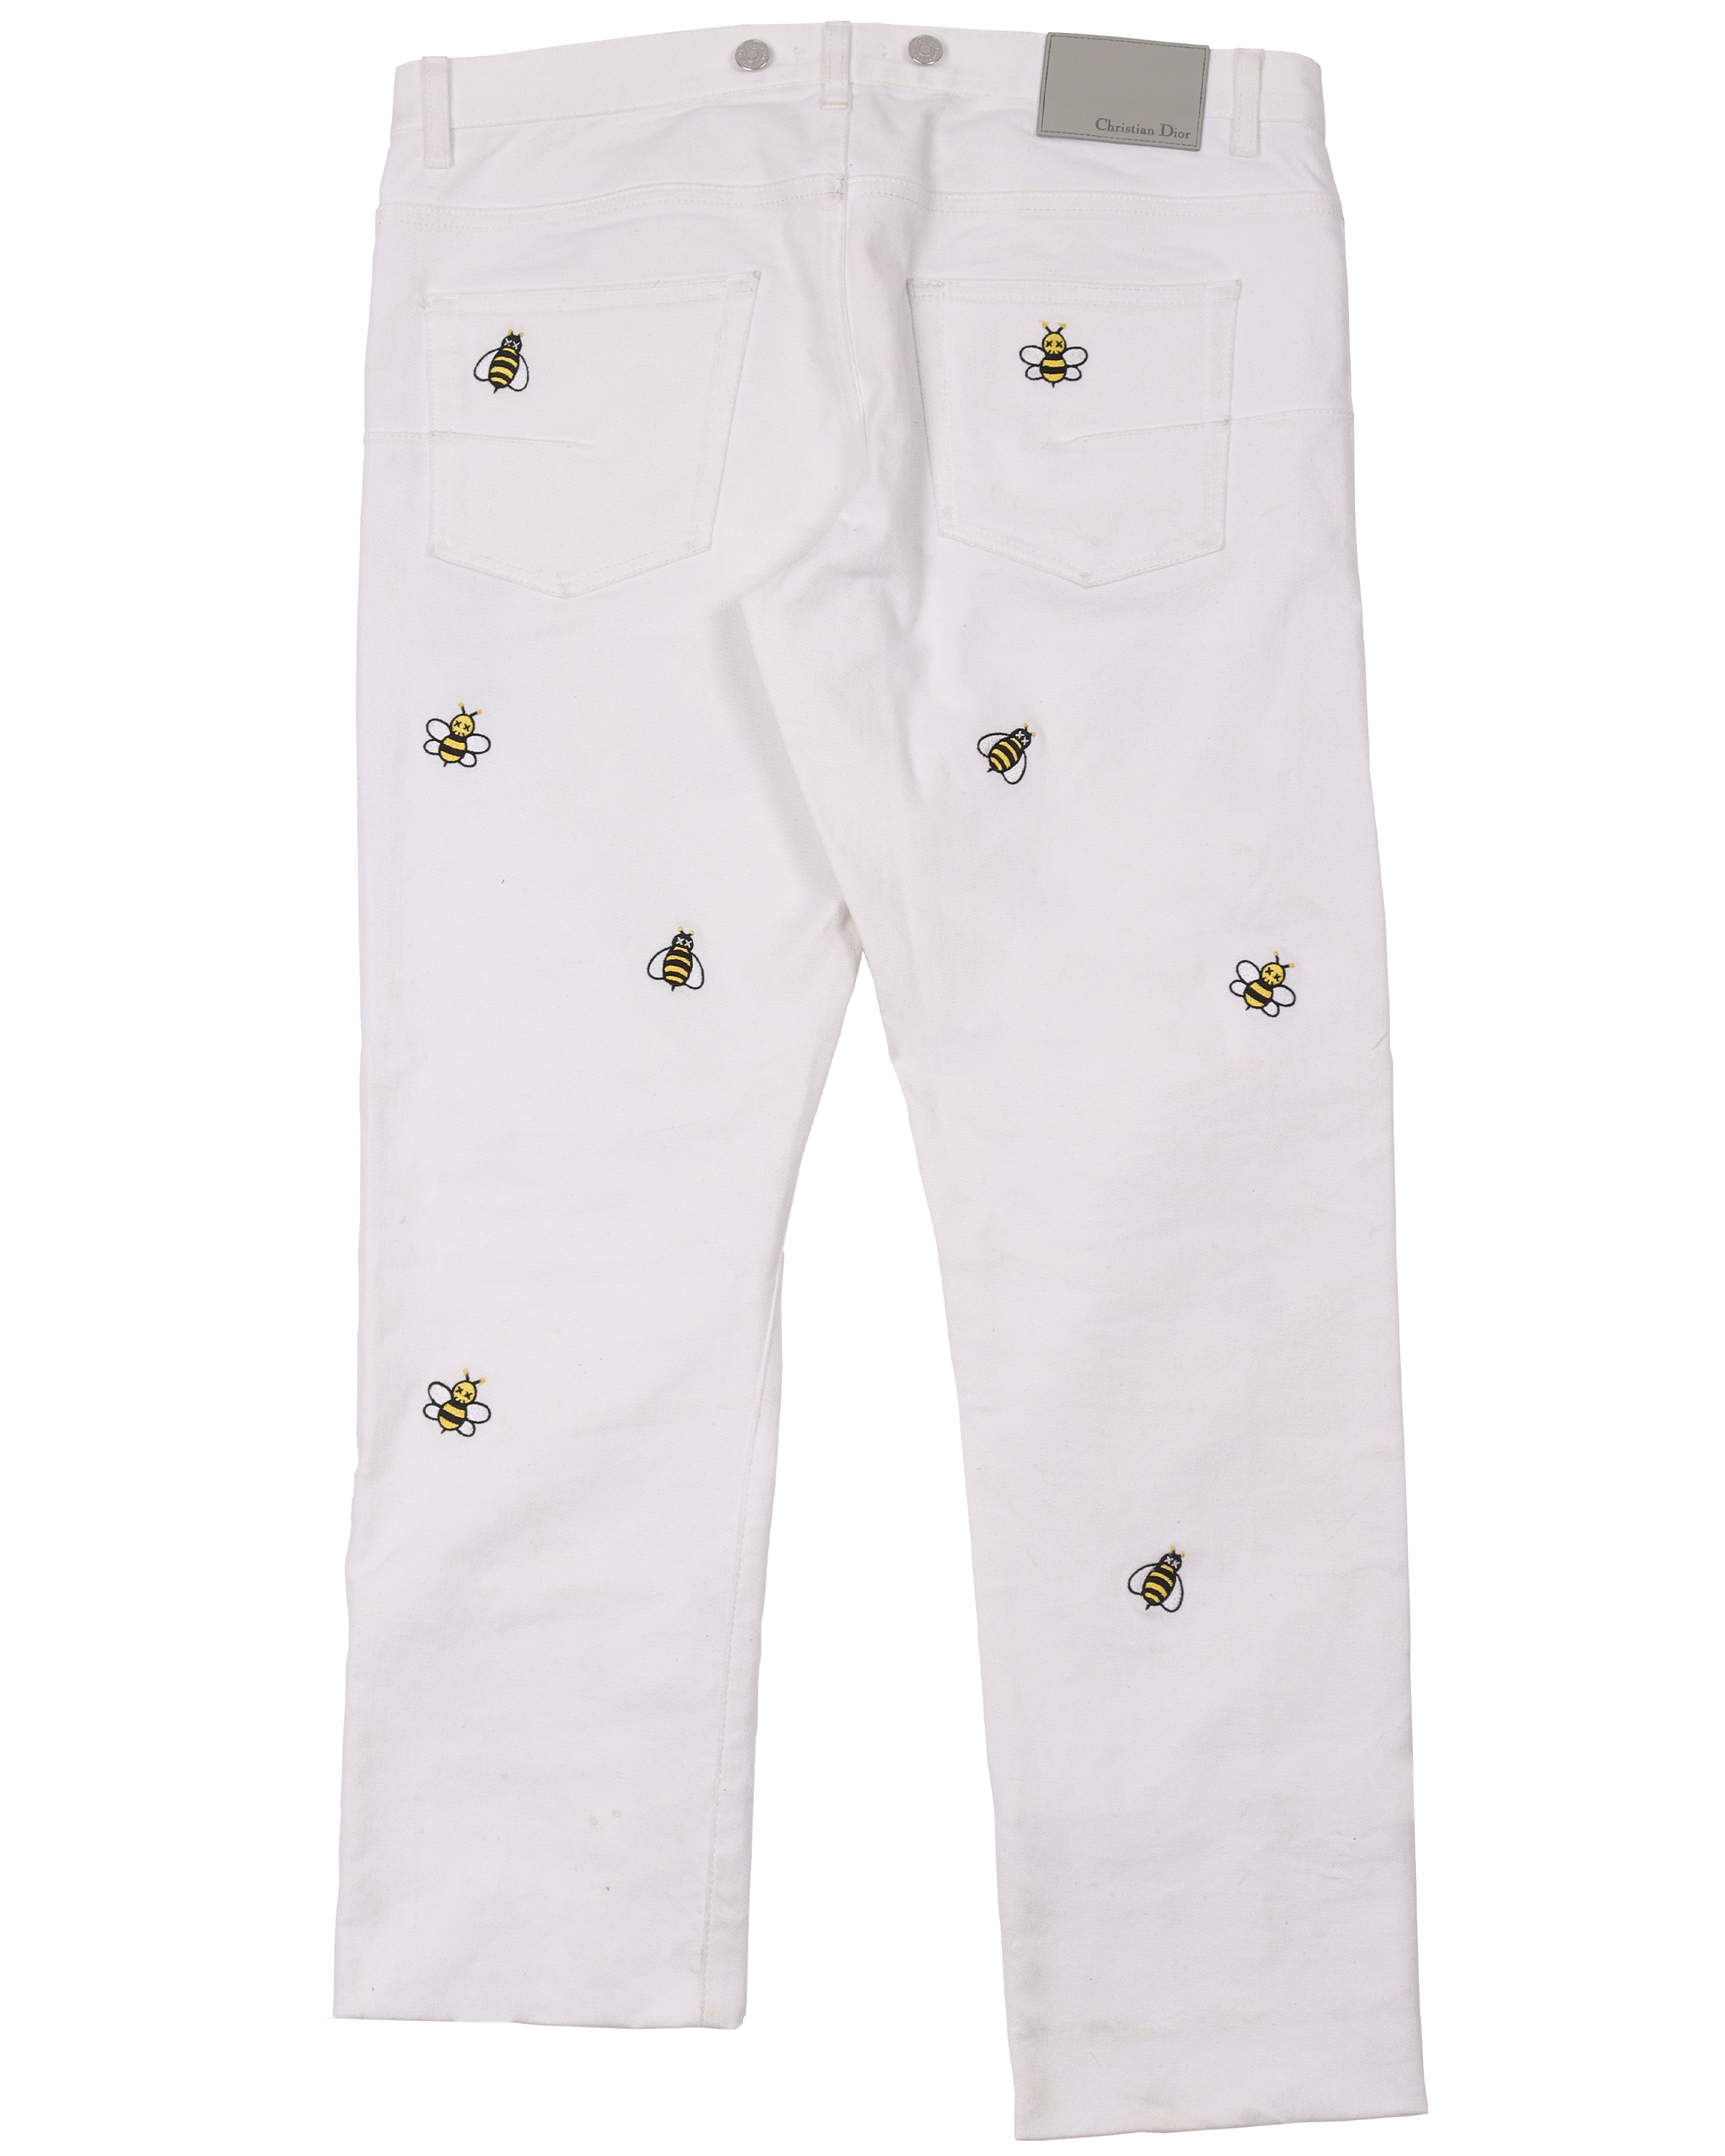 KAWS Bee Embroidery Jeans White - SS19